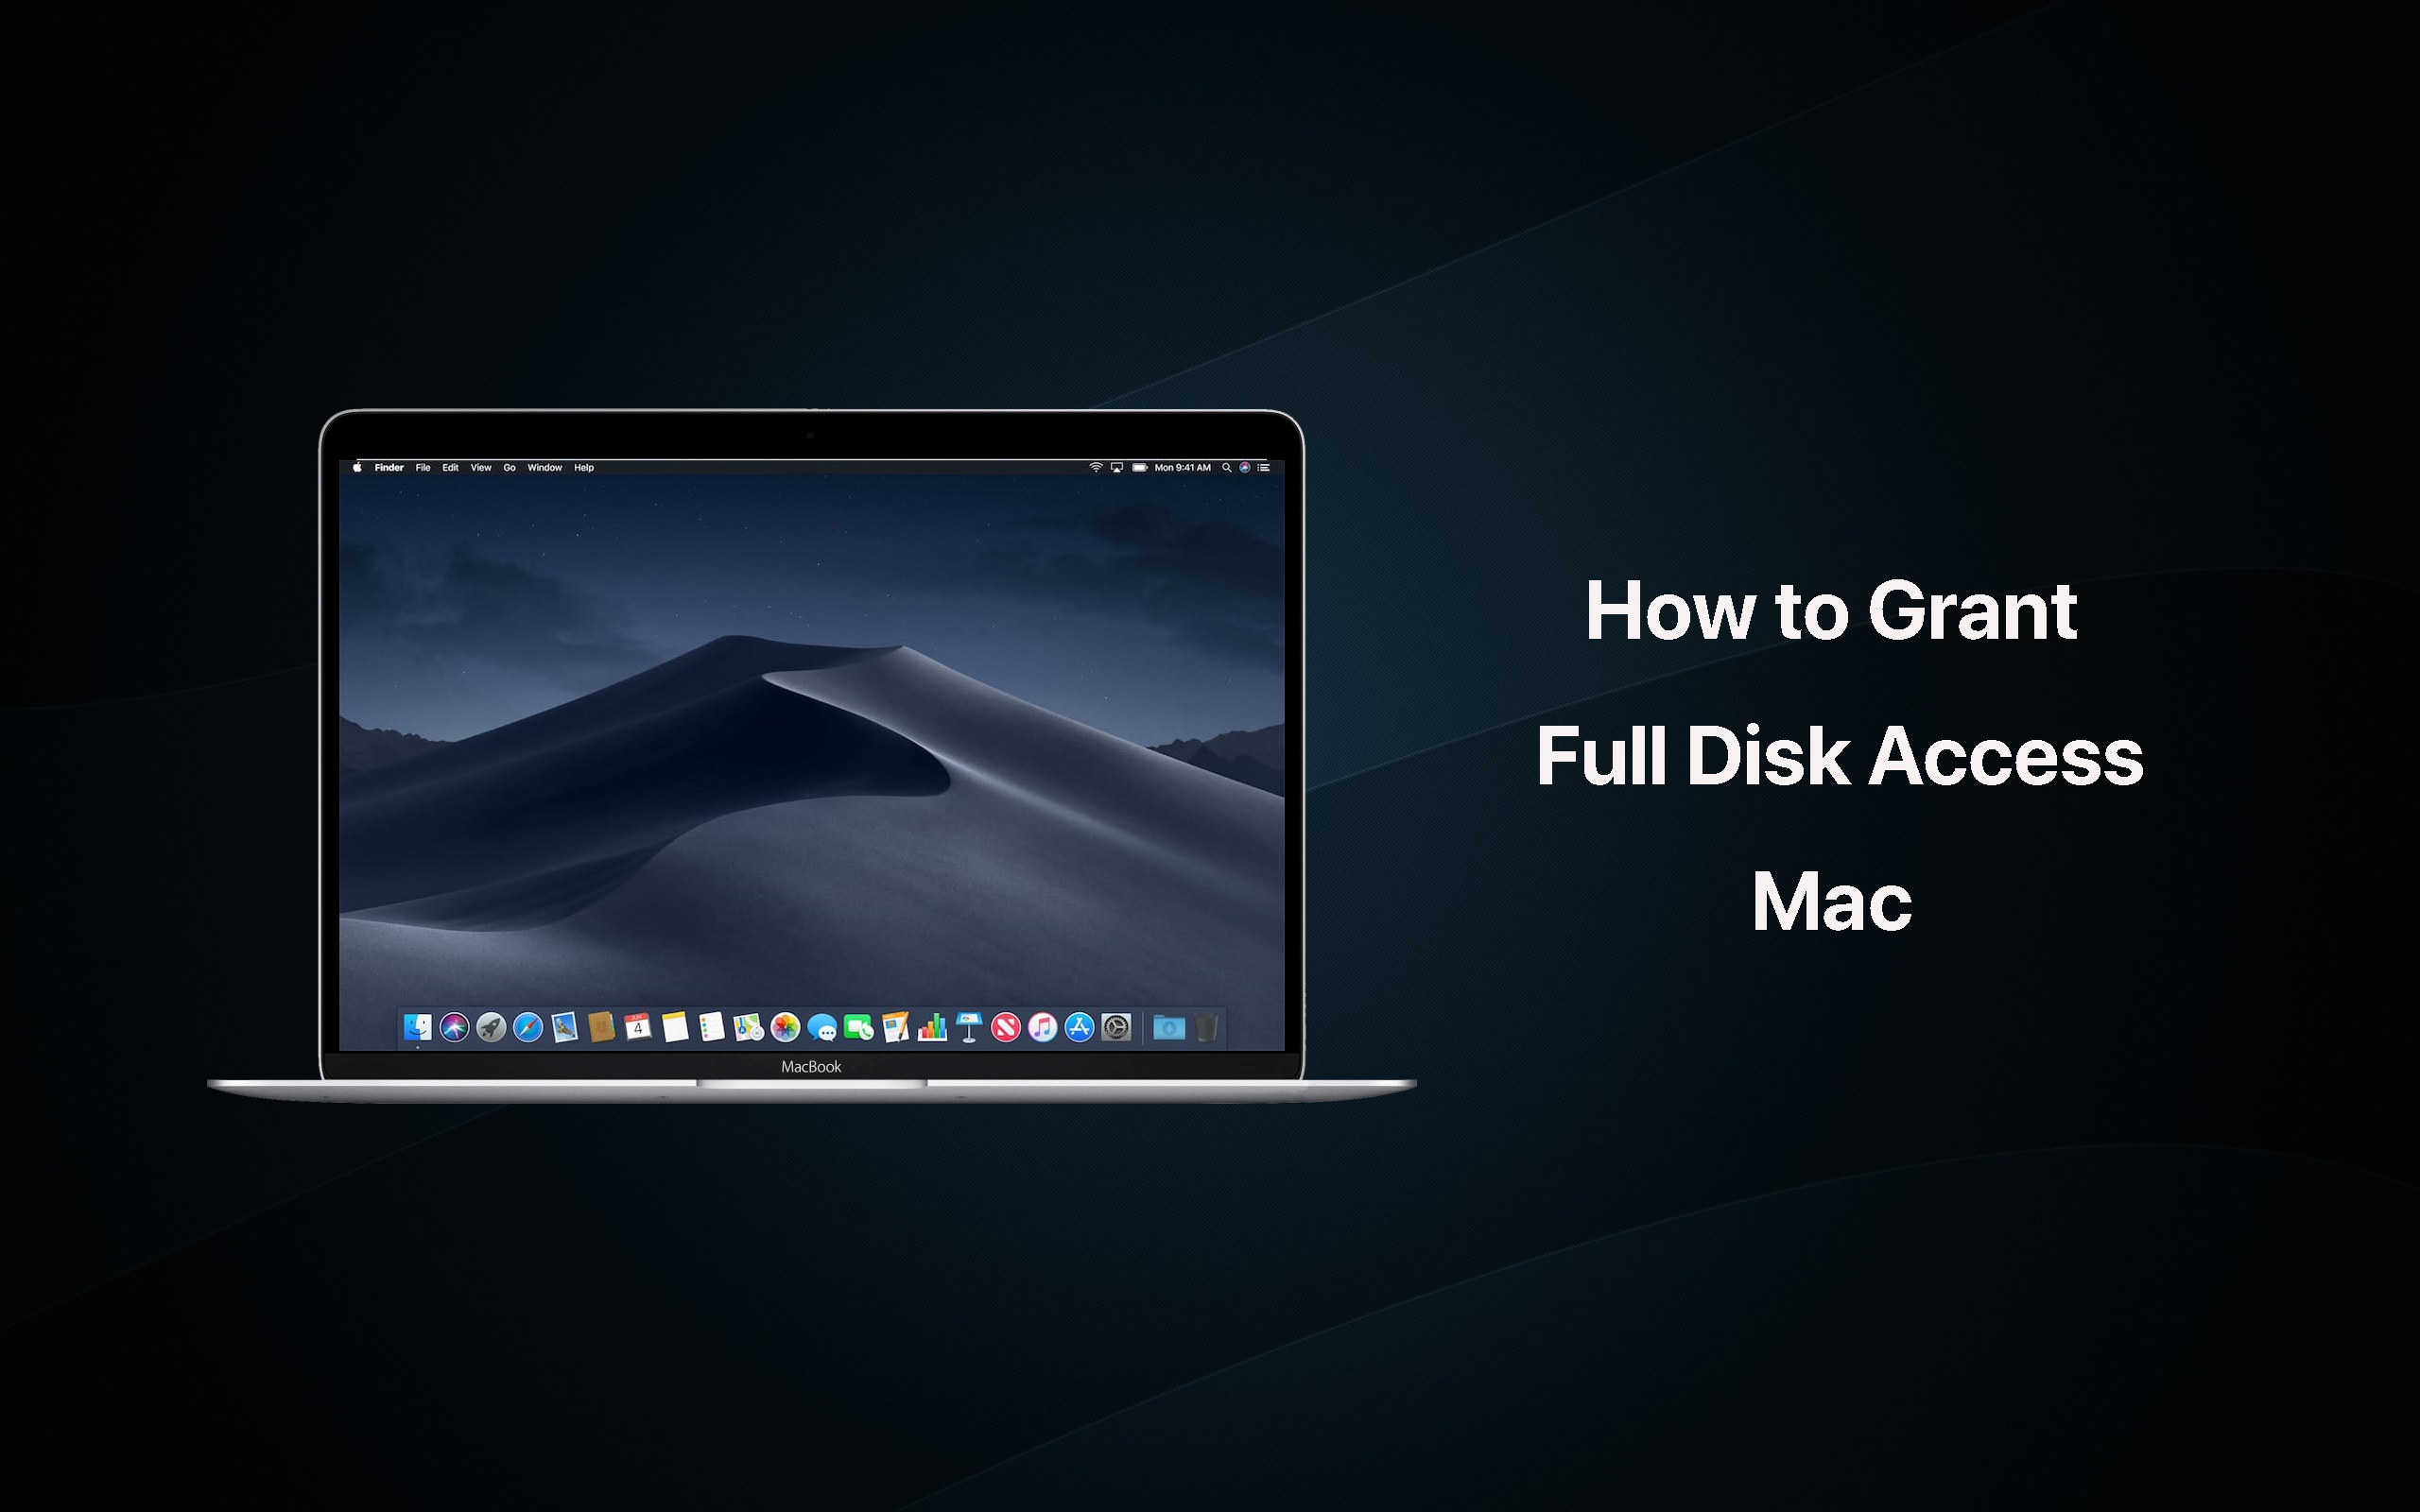 can you get access for mac?